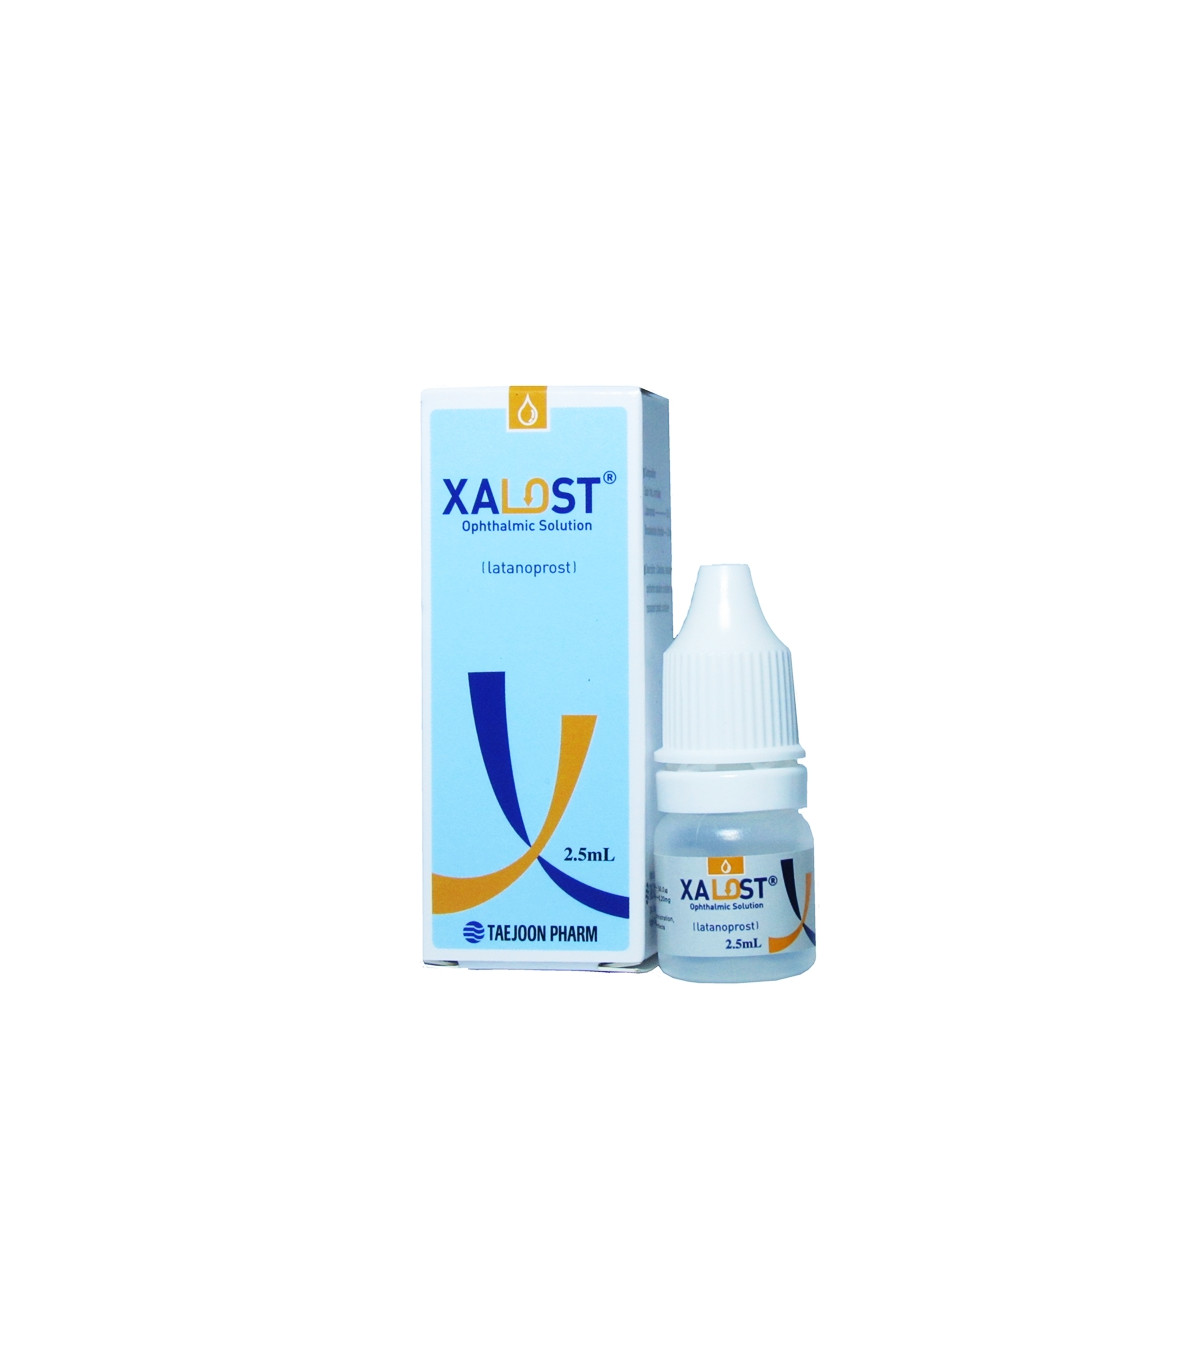 XALOST Ophthalmic Solution - 2.5ml